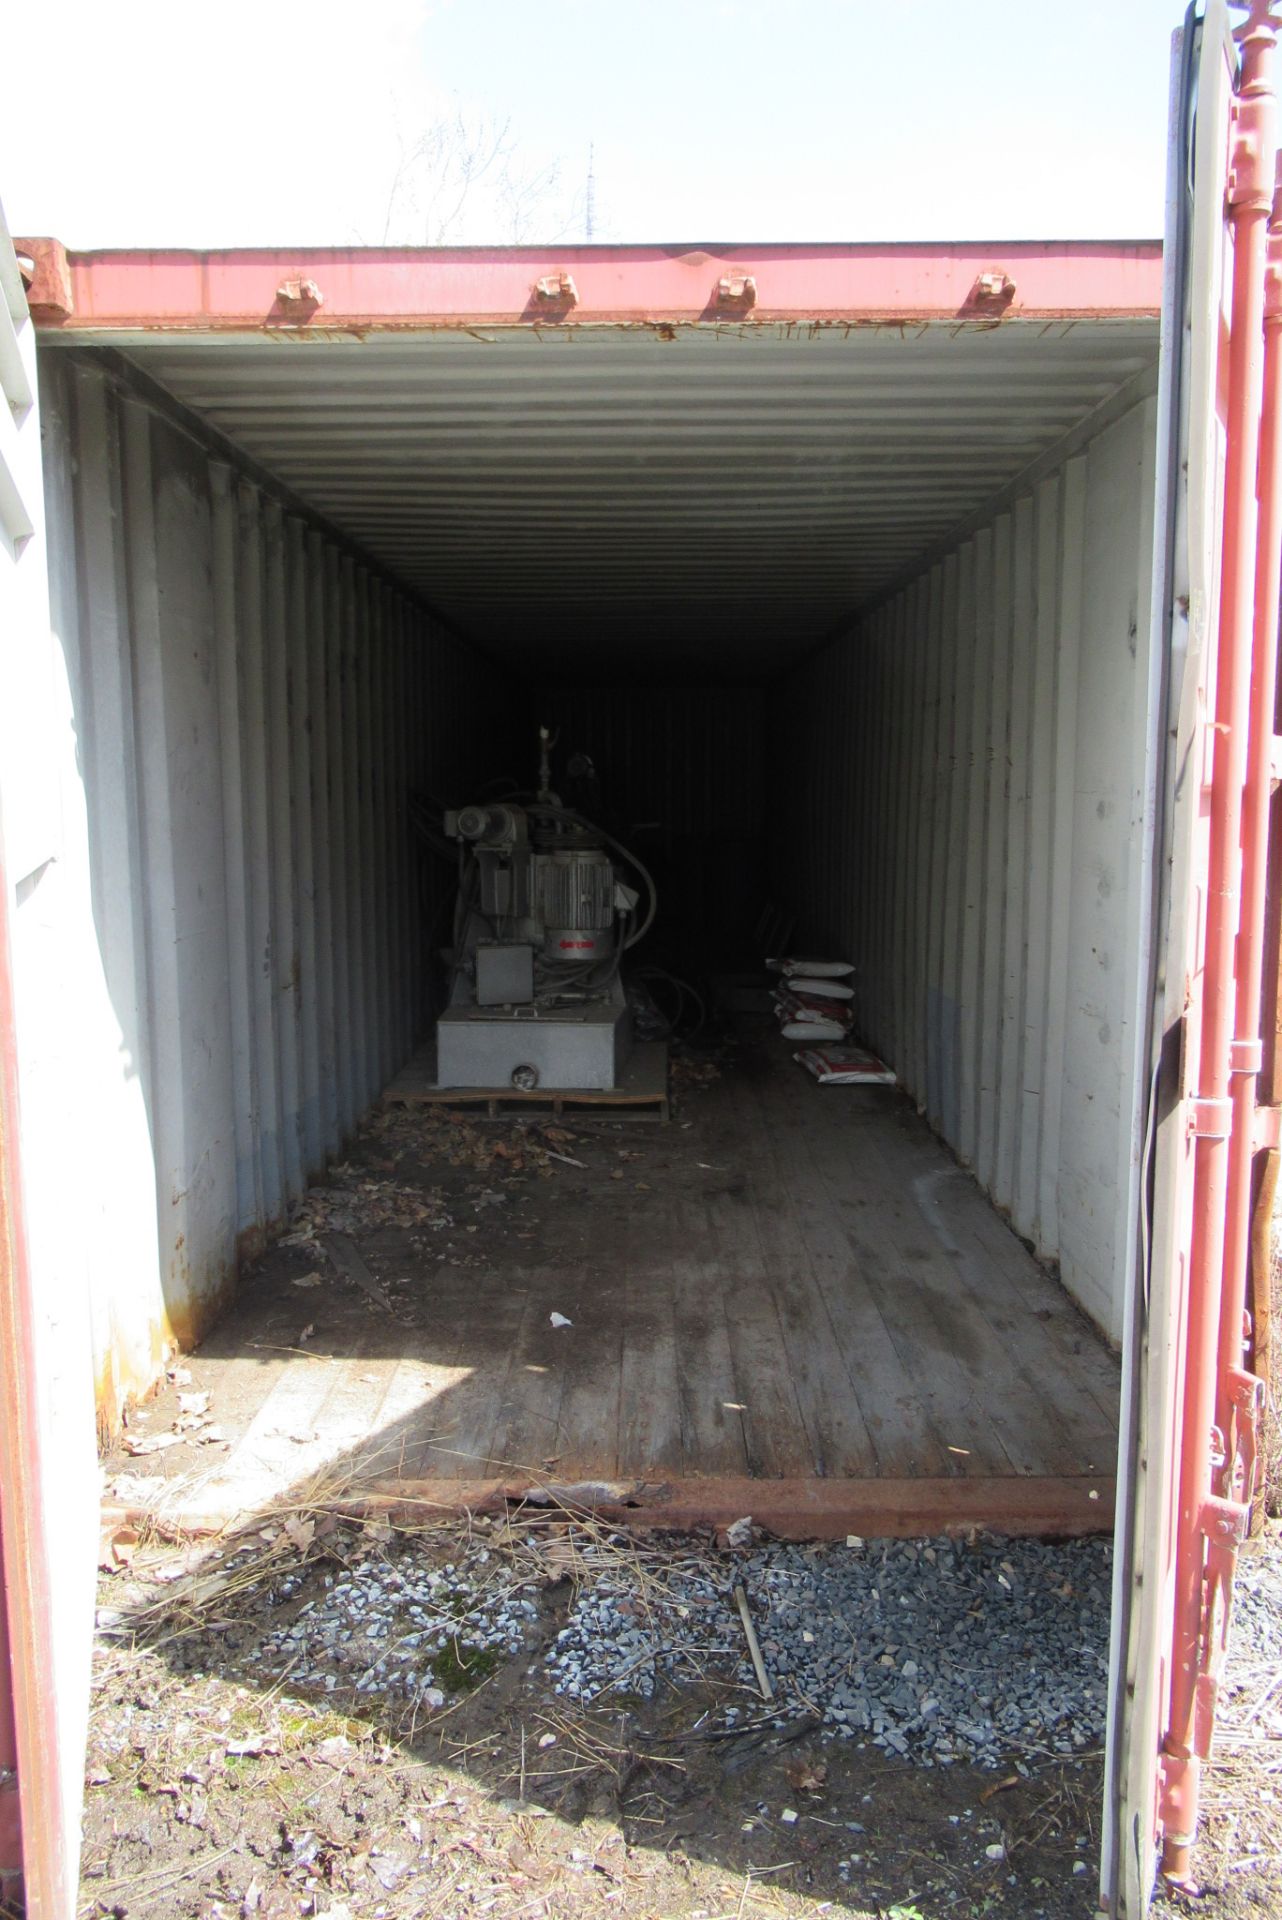 1985 40' Steel Shipping Container w/Contents - Image 5 of 7